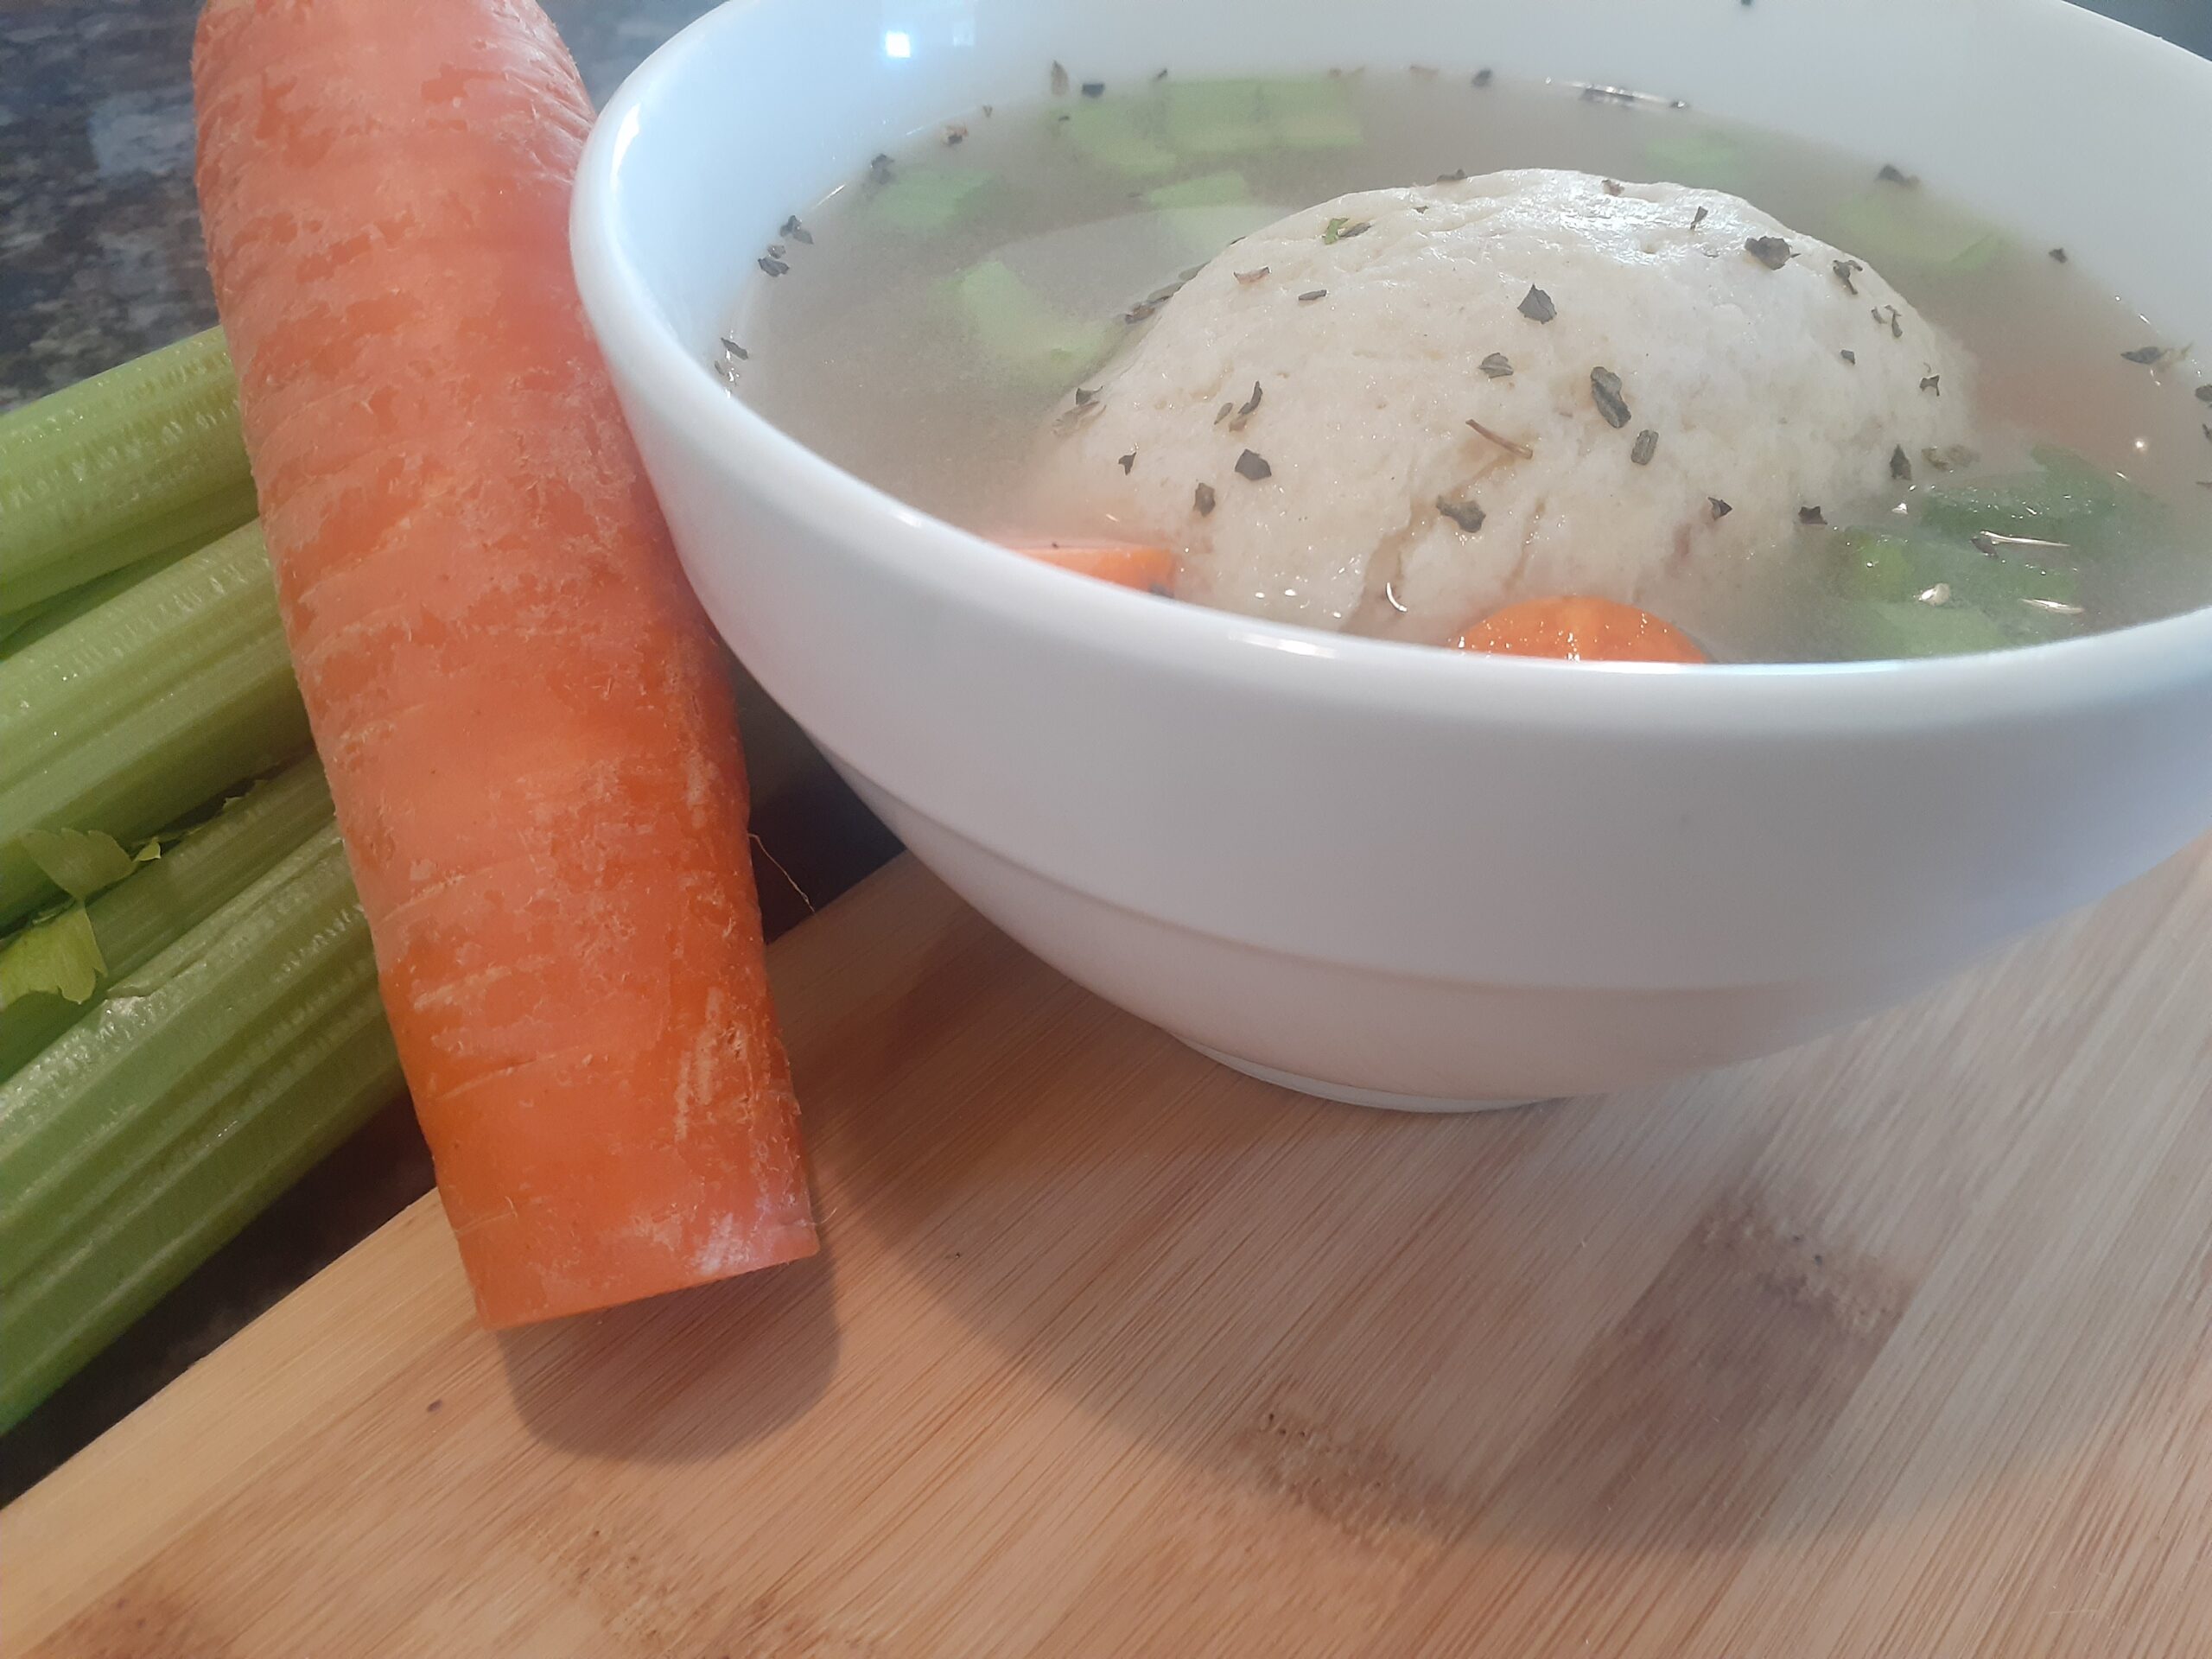 Matzo Ball Soup Nutrition and Ingredients